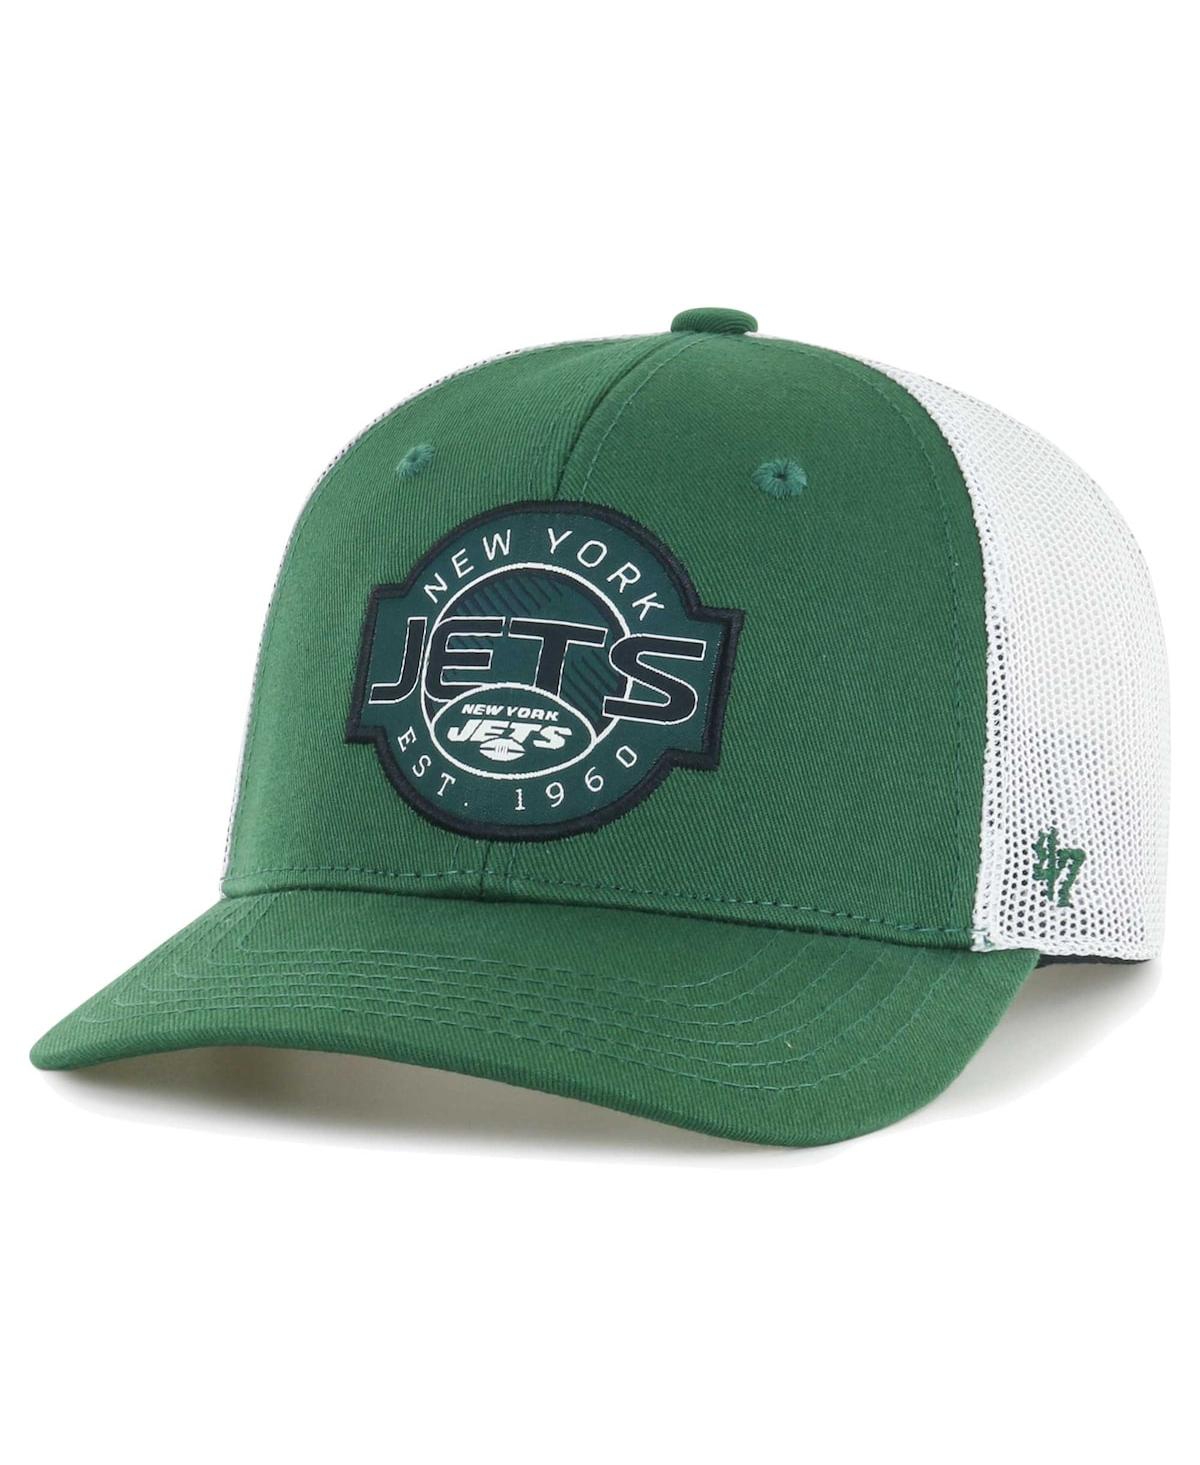 47 Brand Kids' Youth Boys And Girls ' Green, White New York Jets Scramble Adjustable Trucker Hat In Green,white